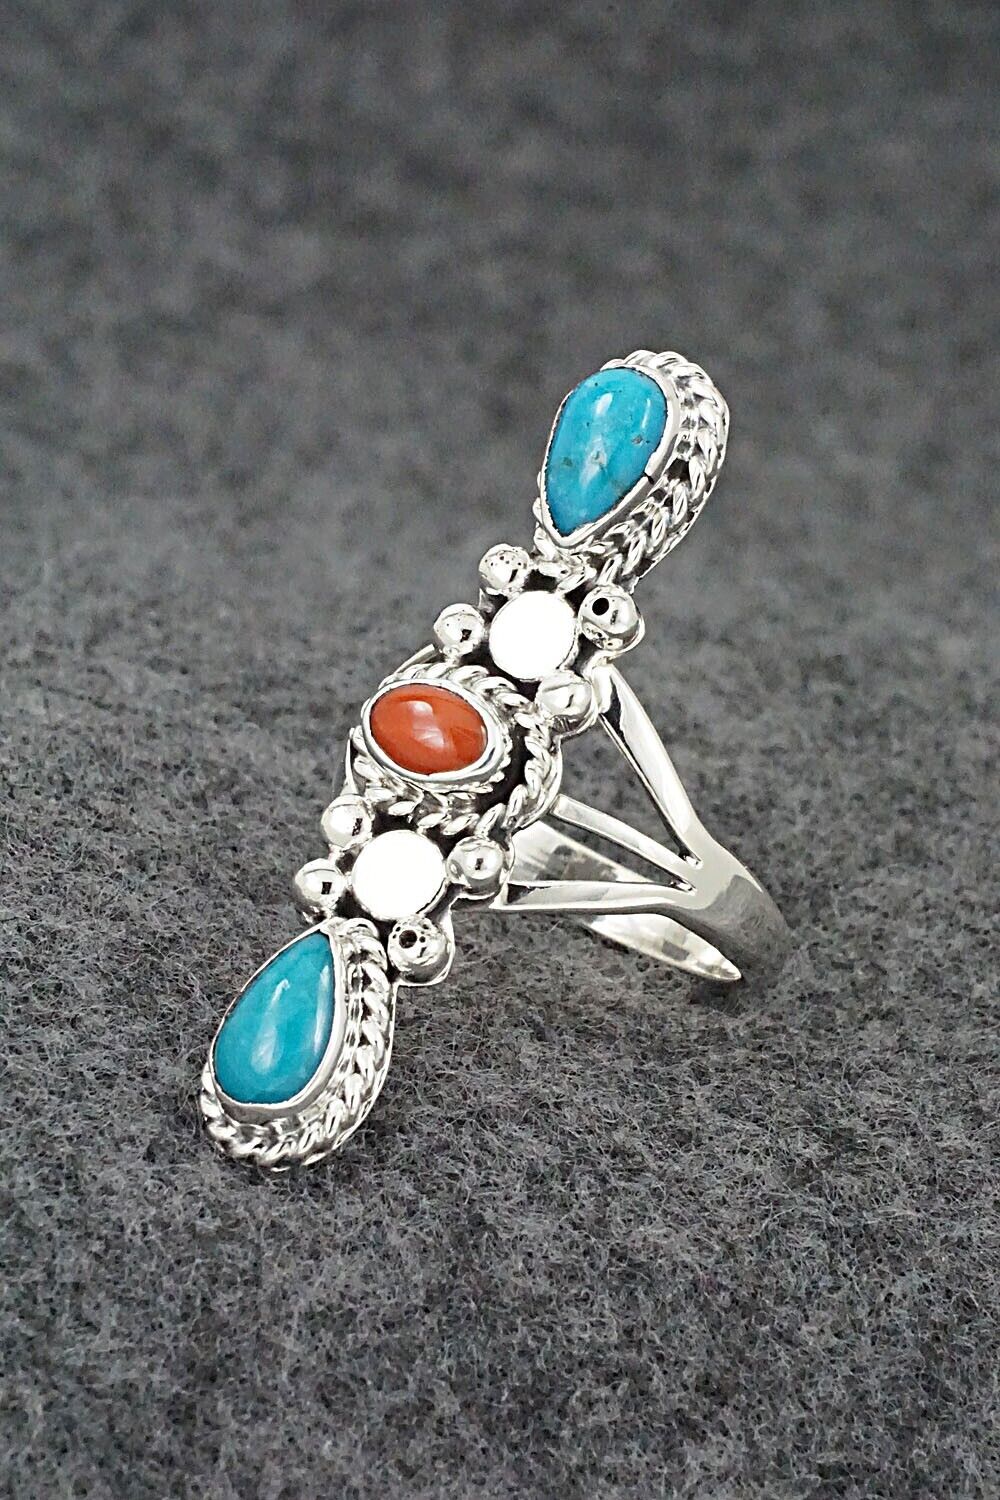 Turquoise, Coral & Sterling Silver Ring - Andrew Vandever - Size 9